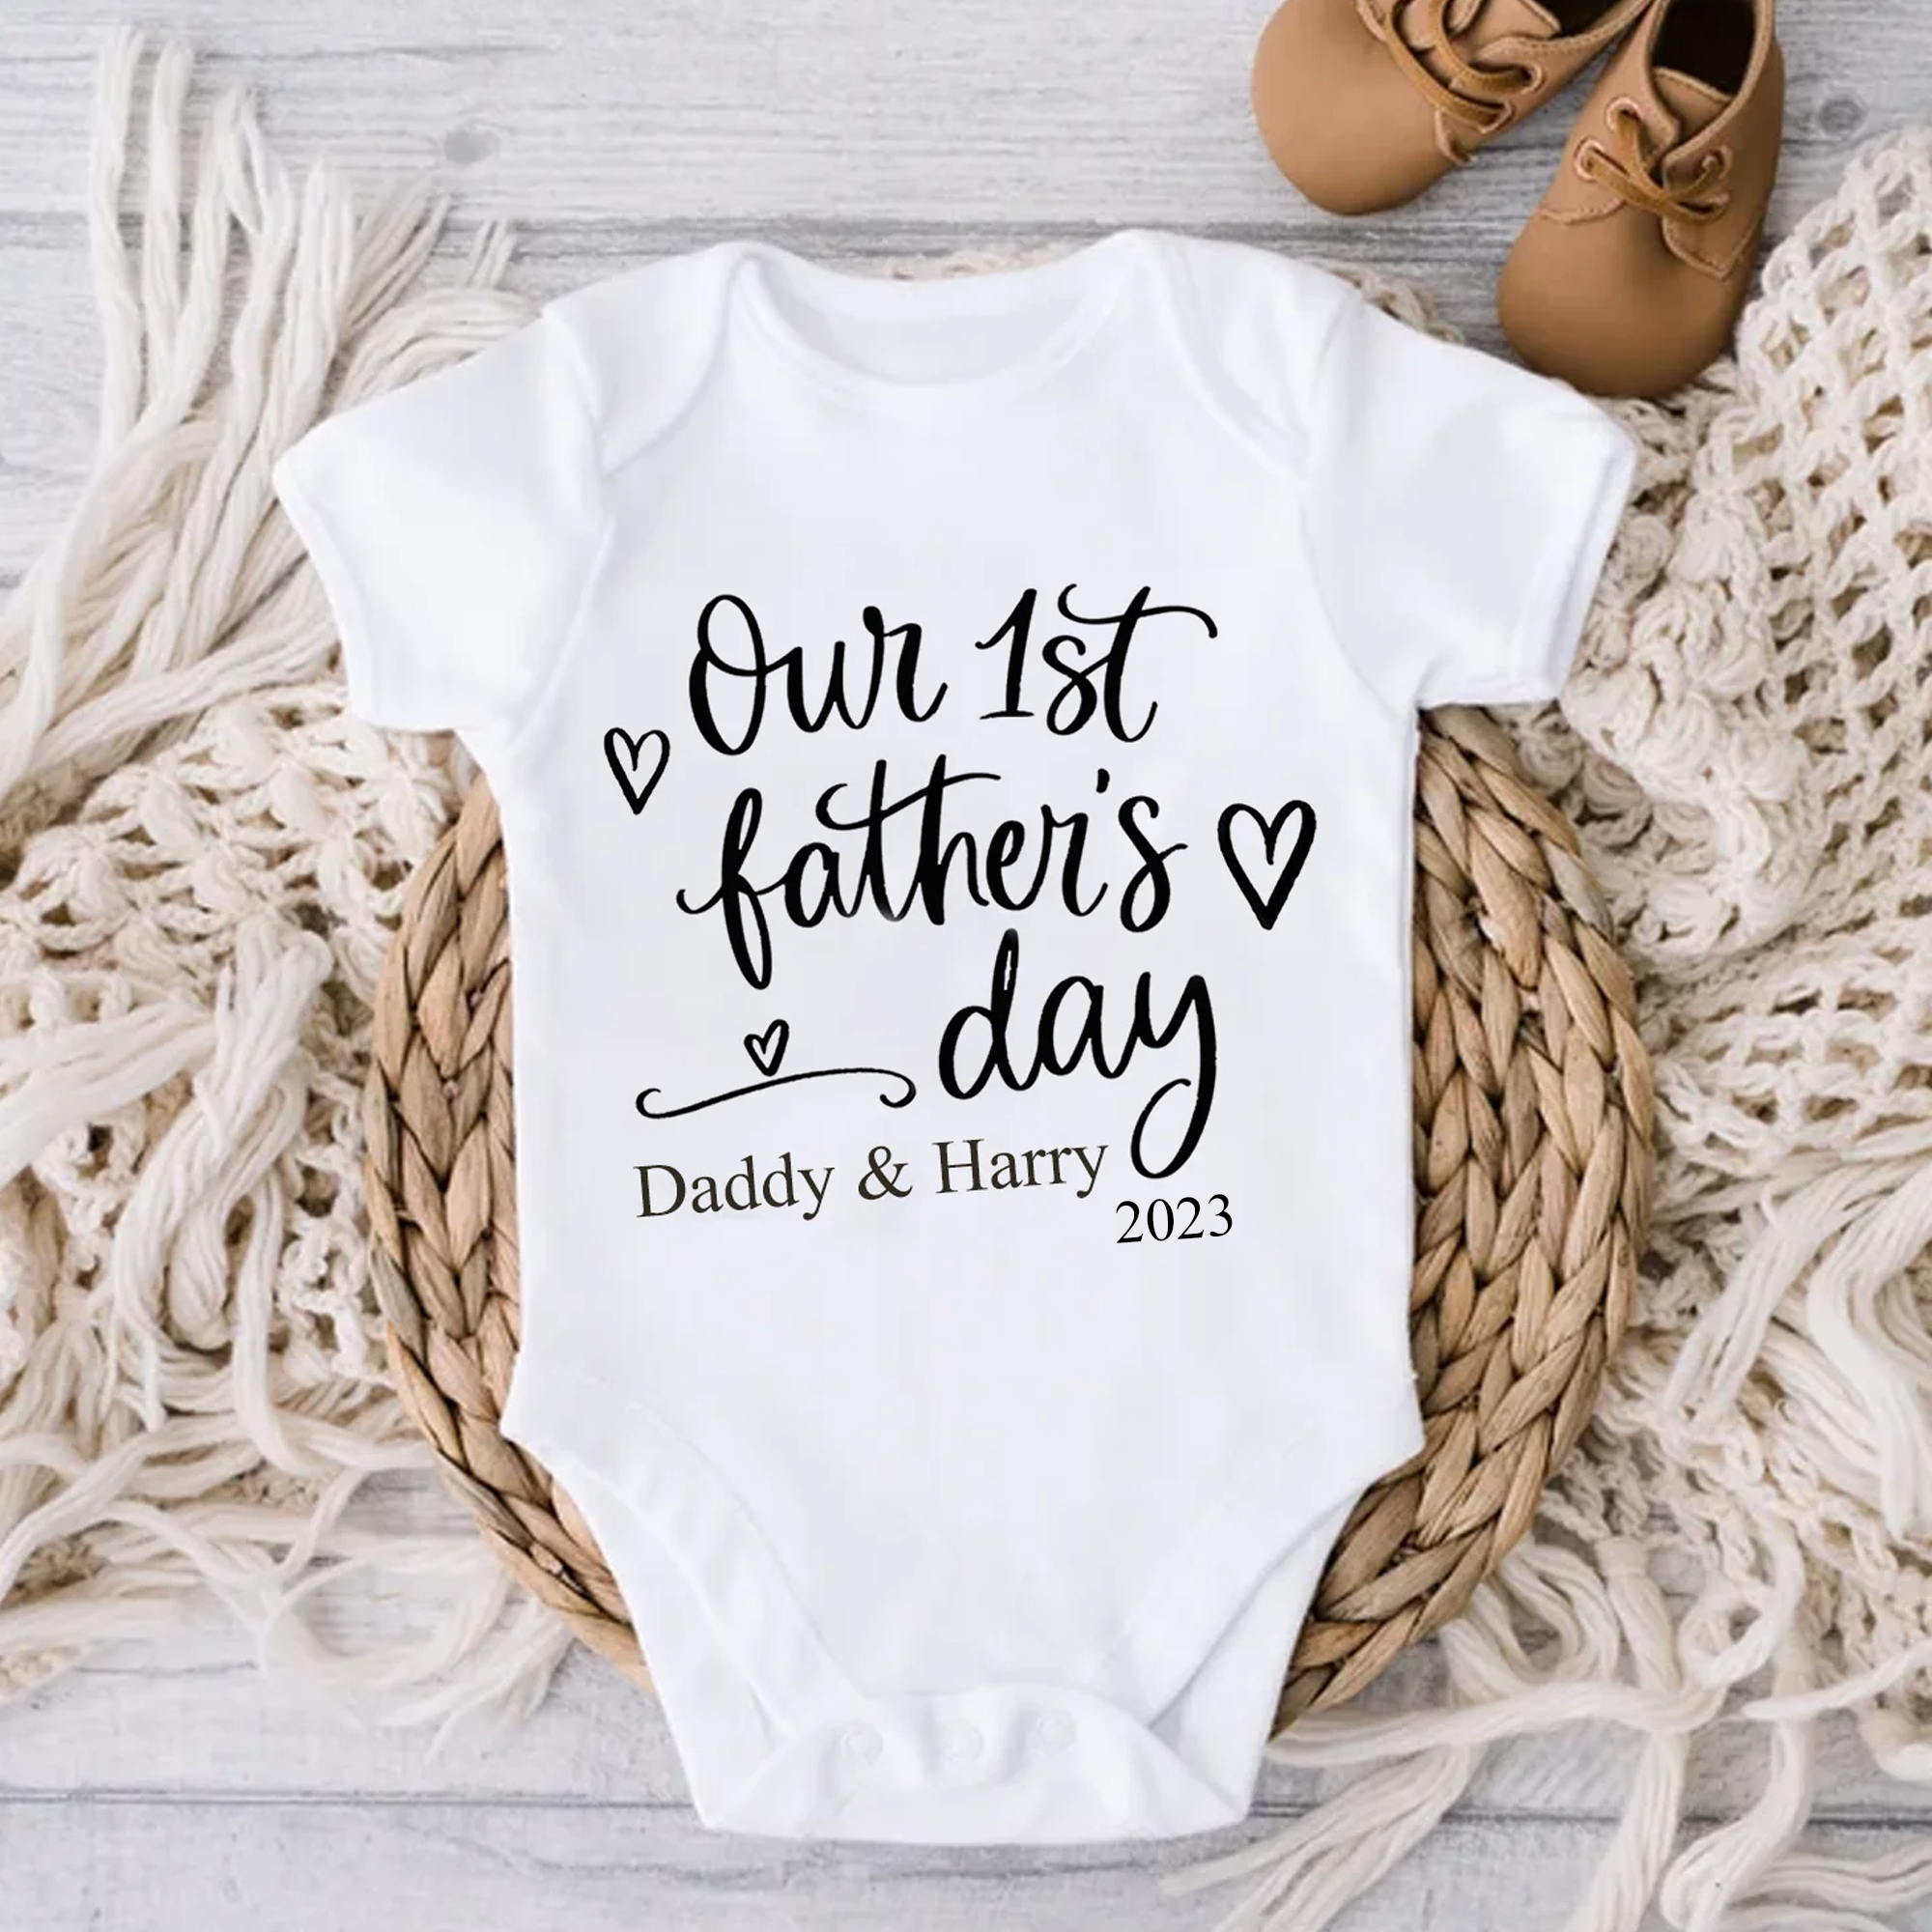 Our First Father's Day - Personalised Baby Vest